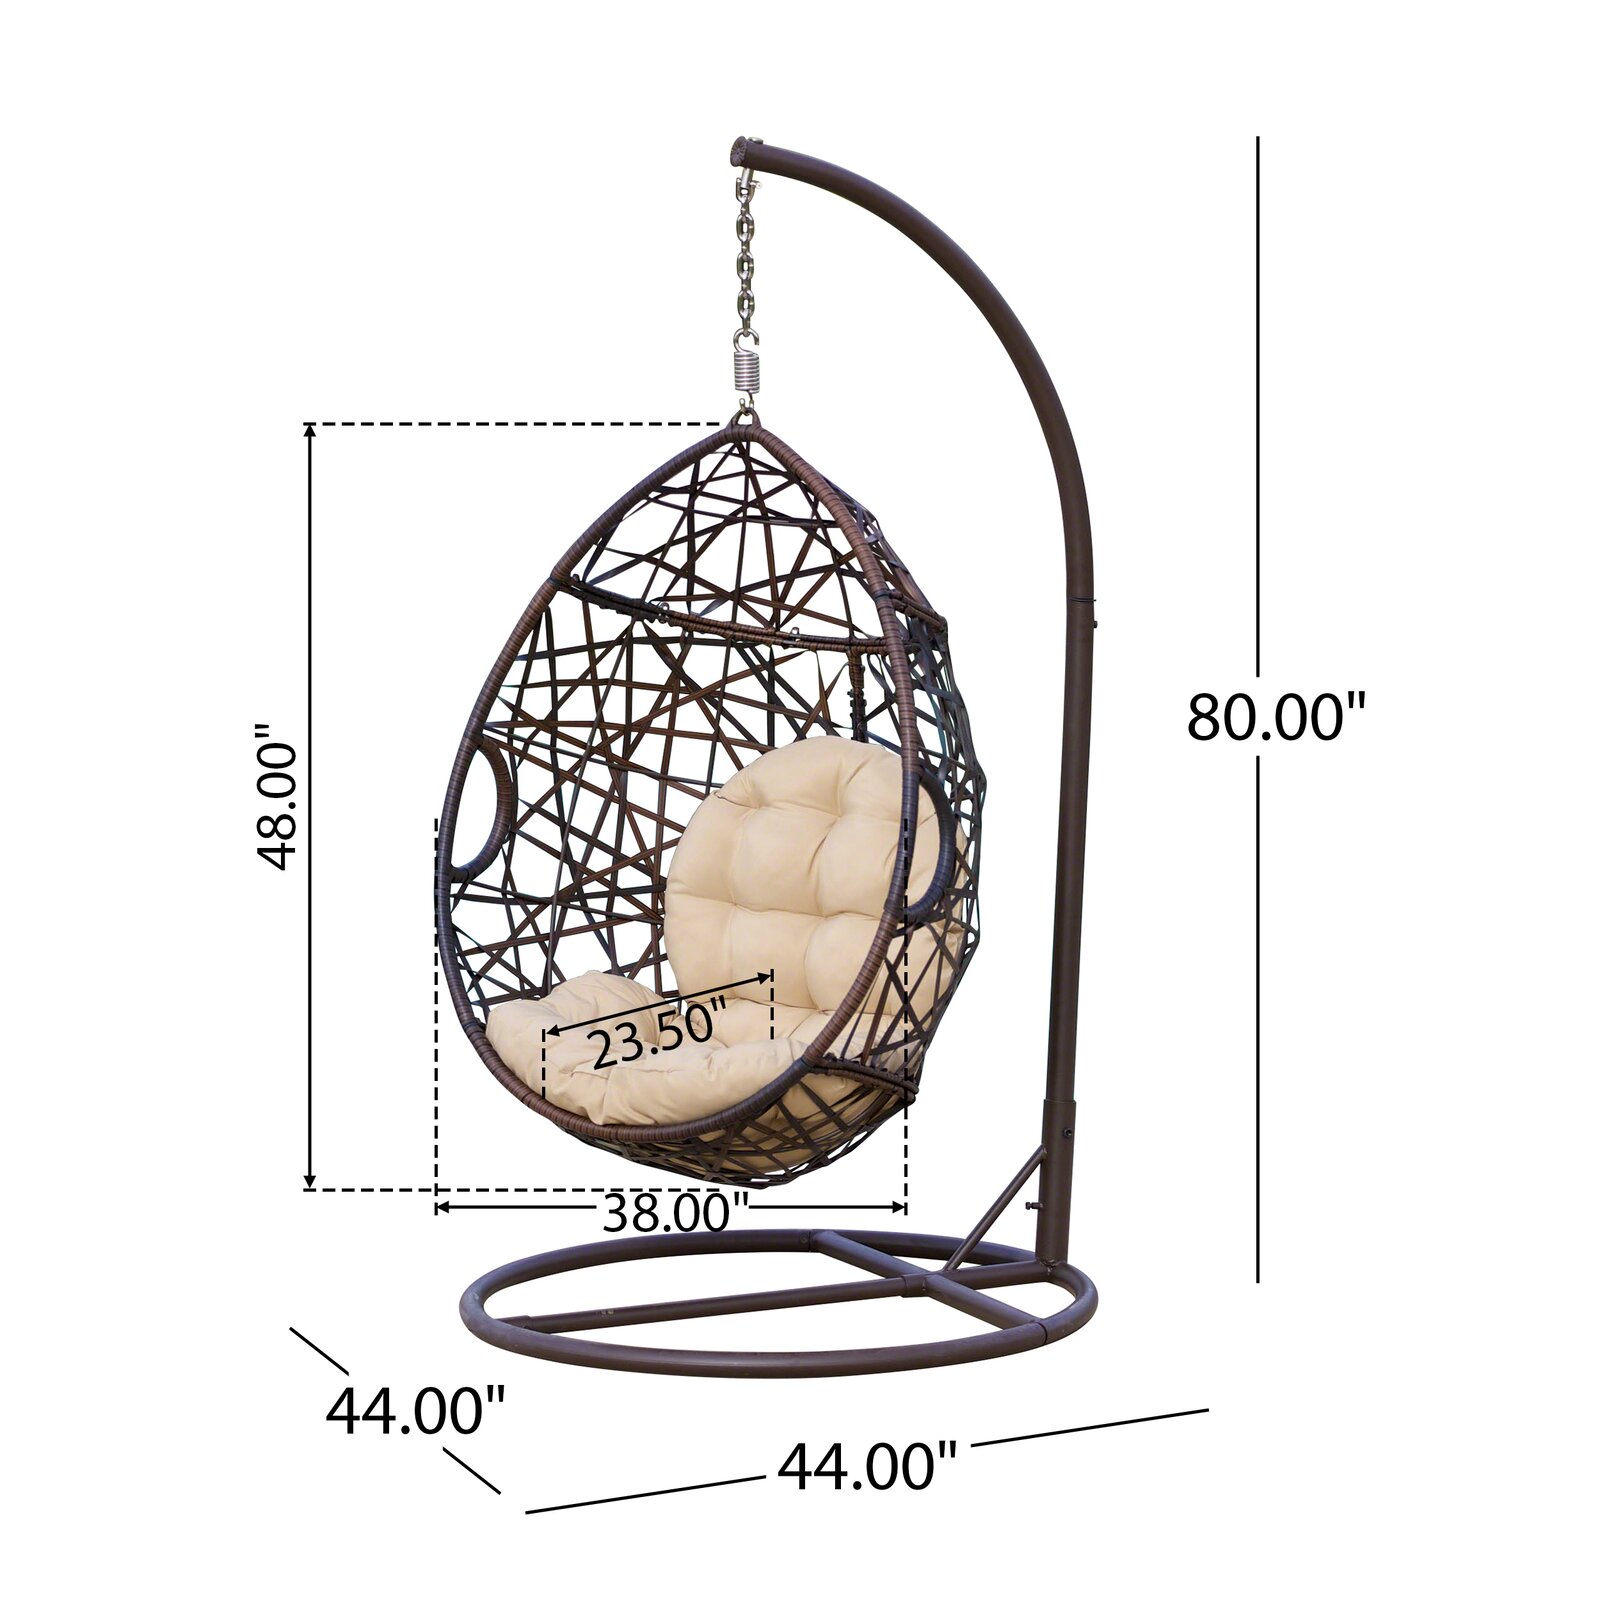 Darwin egg swing chair with stand